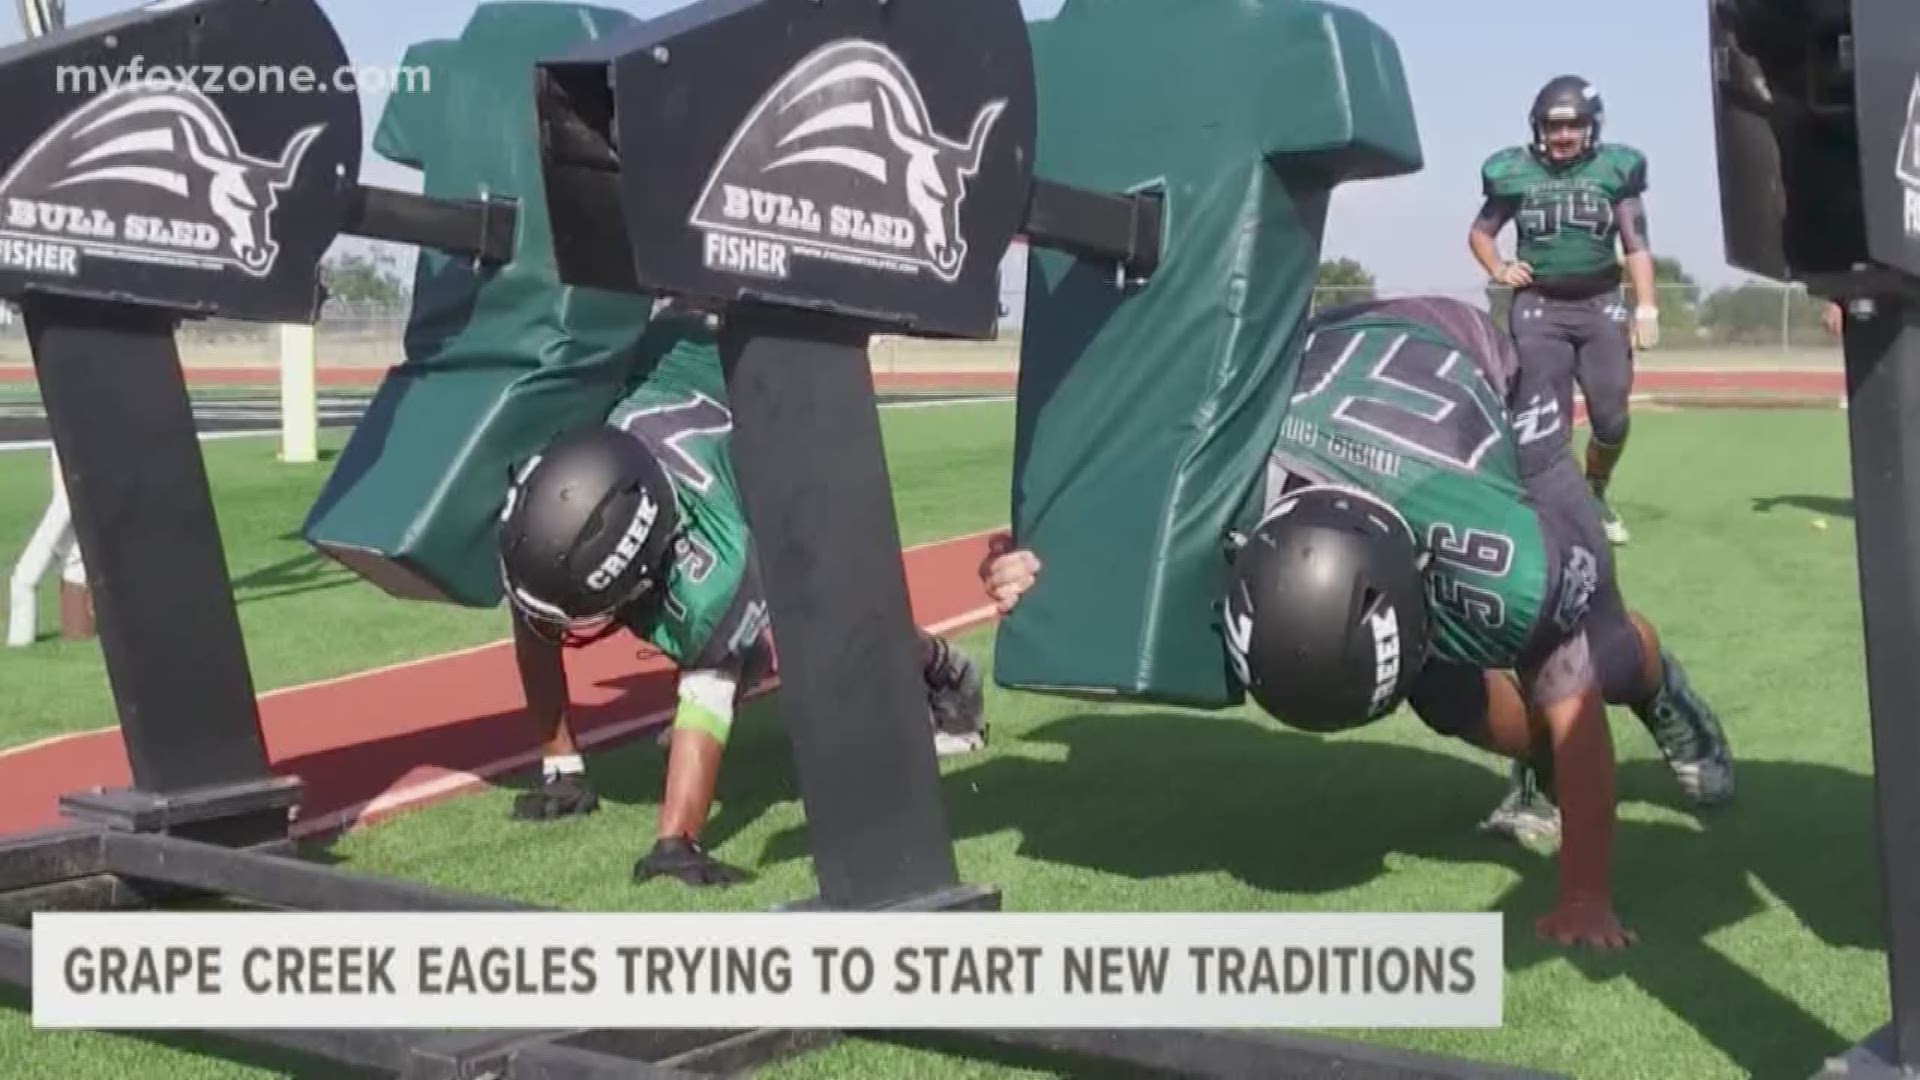 Eagles head coach Tanner Thiel wants to change the traditions associated with his ball club